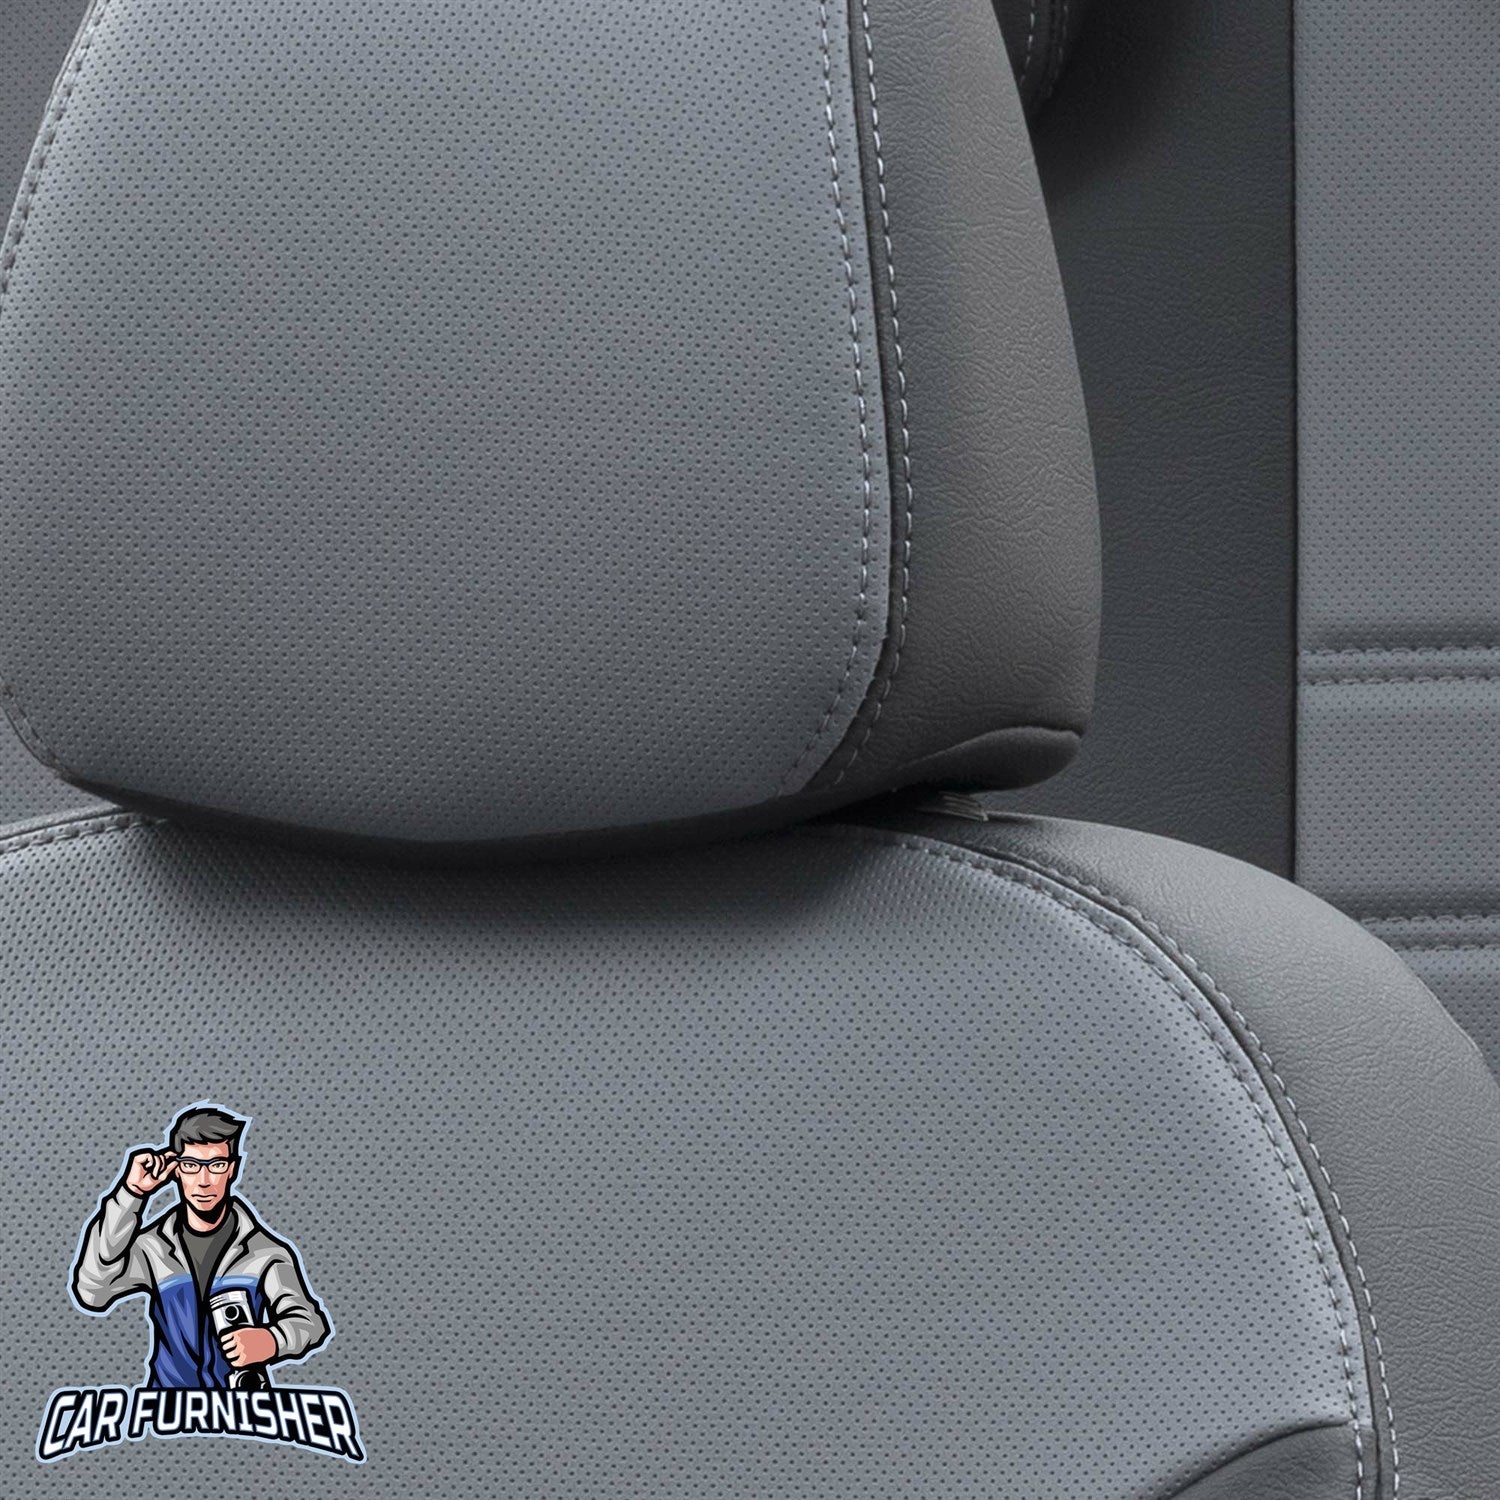 Volkswagen Tiguan Seat Cover Istanbul Leather Design Smoked Black Leather